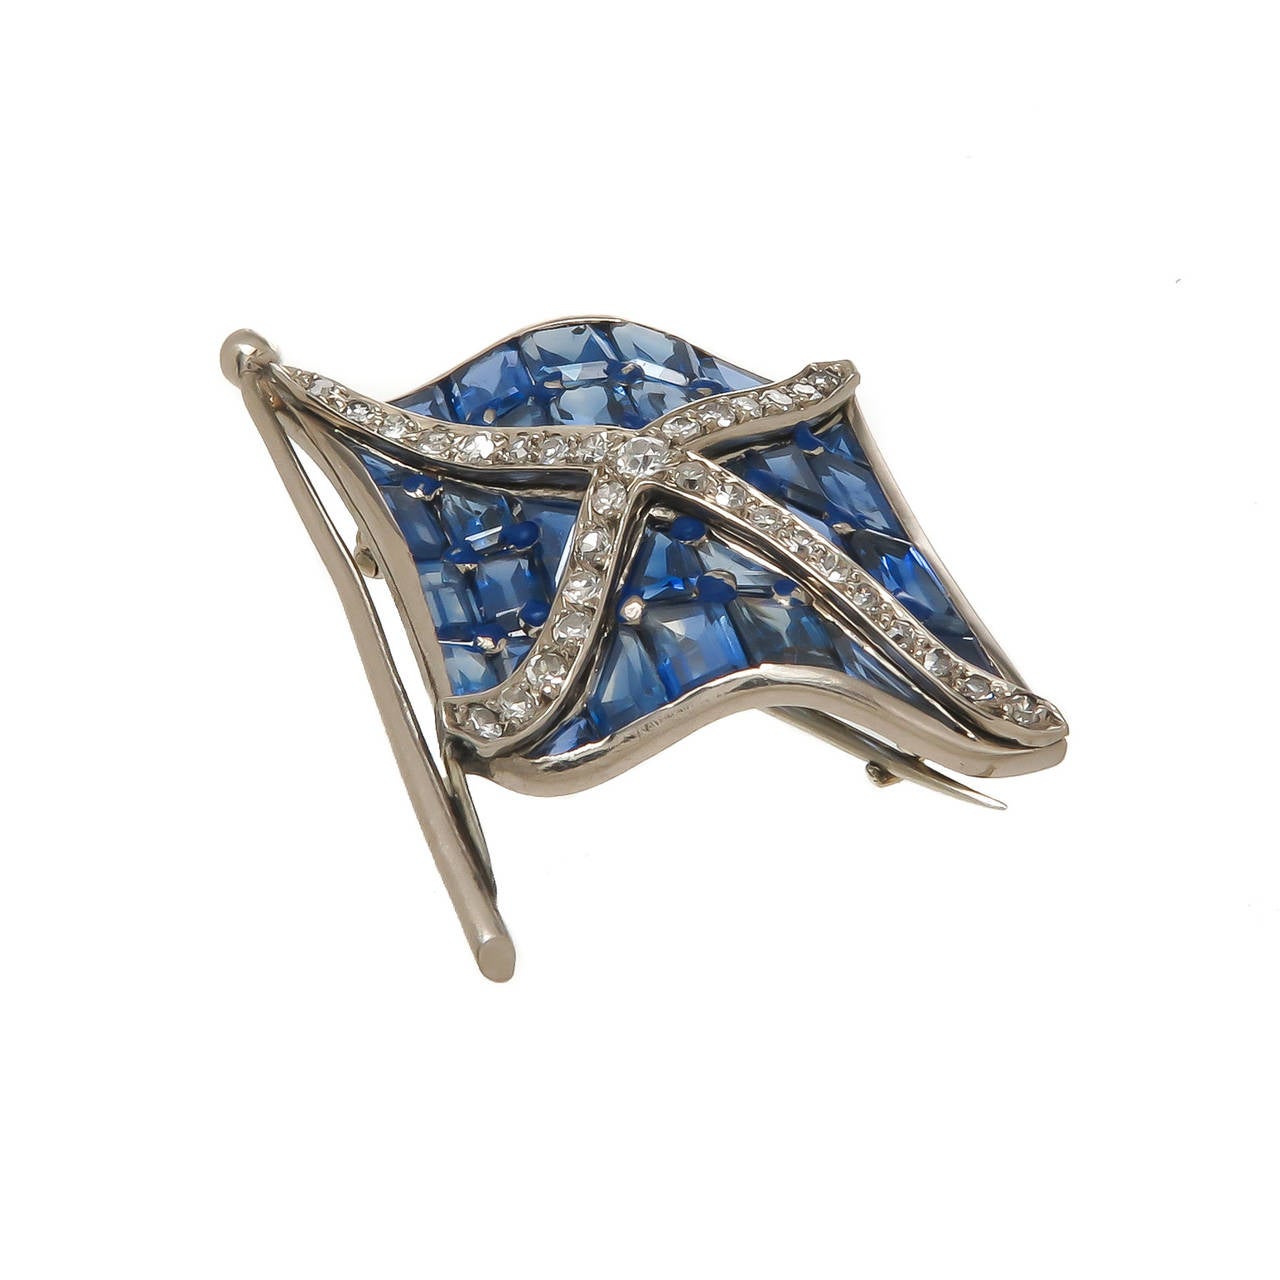 Circa 1930 Platinum Diamond and Sapphire waving Flag Brooch. Set with step cut Sapphires of Ceylon Color and Origin and an X in the center set with old cut Diamonds. Measuring 1 1/2 inch in length and 1 inch wide.